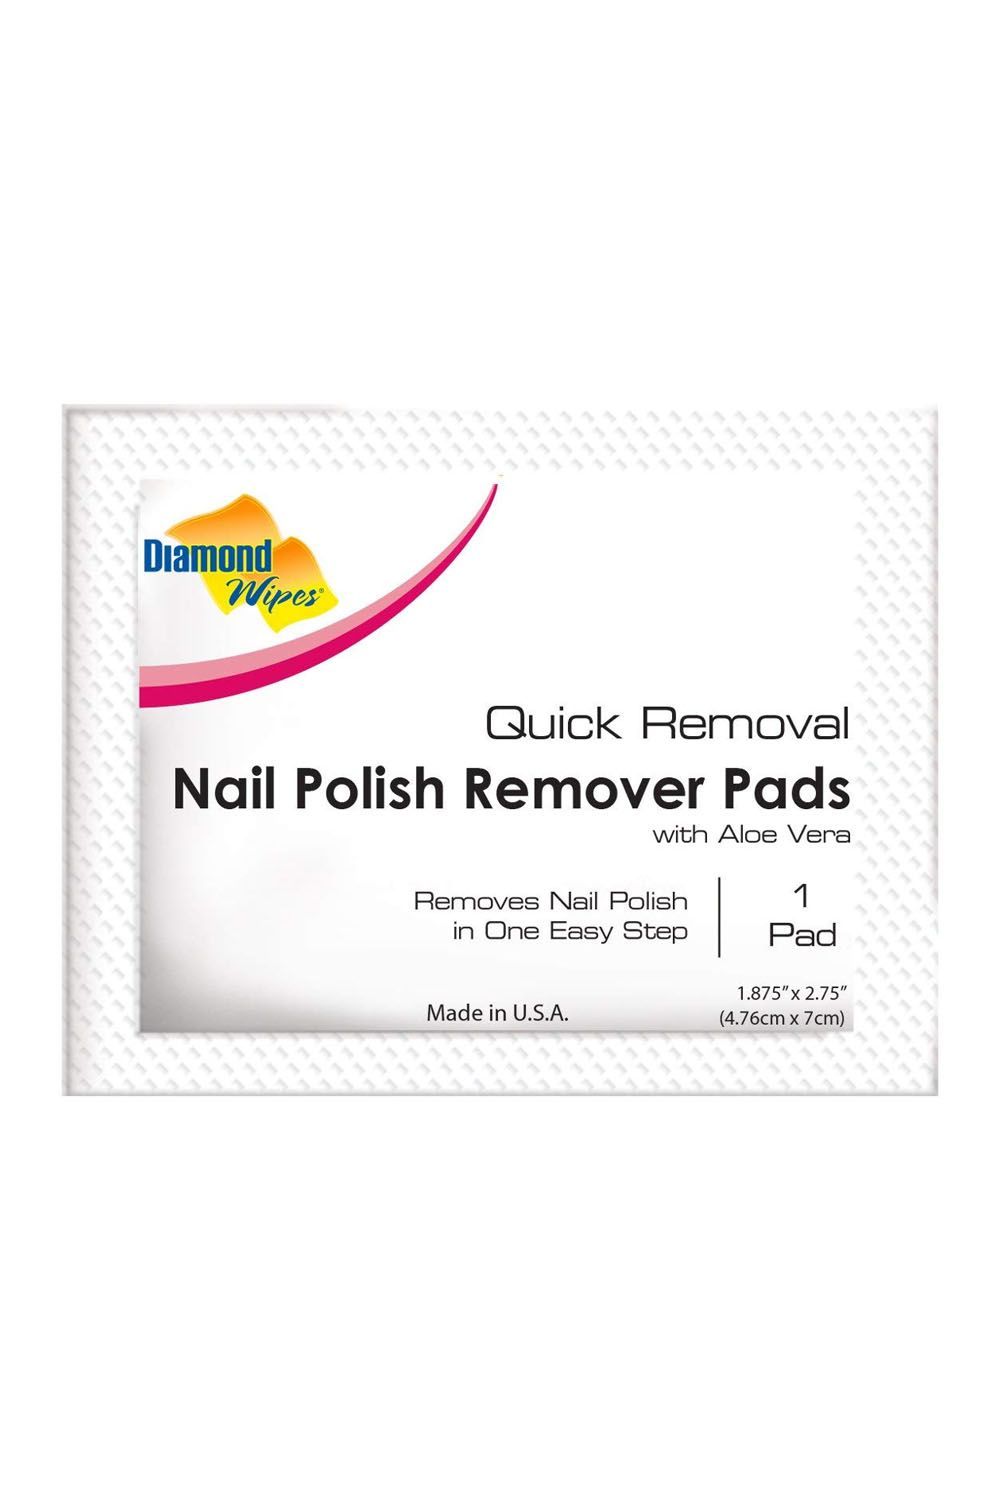 10 Best Nail Polish Removers in 2022 That Won't Damage Nails